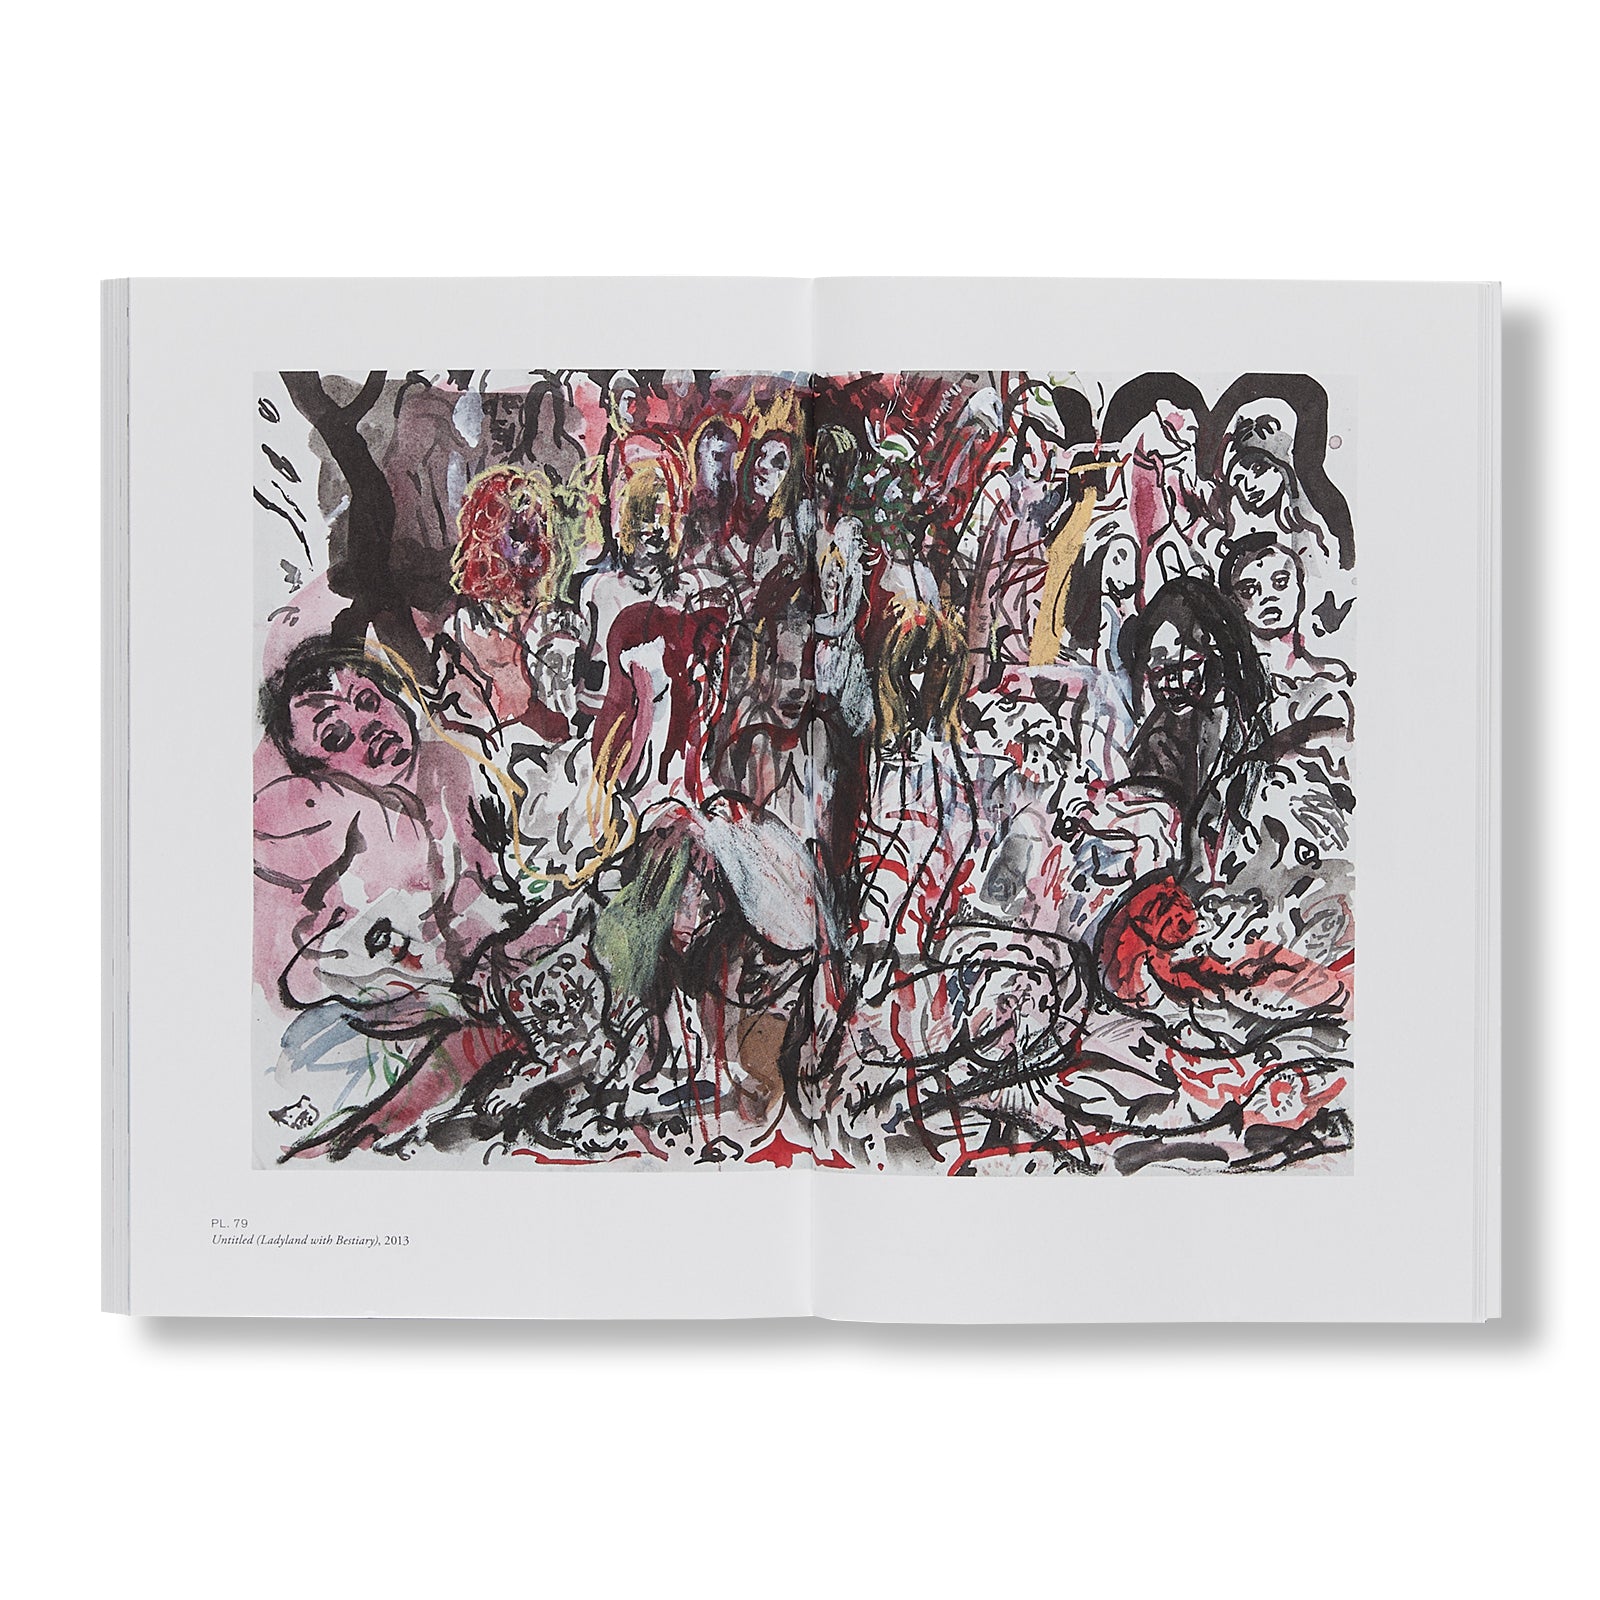 REHEARSAL by Cecily Brown